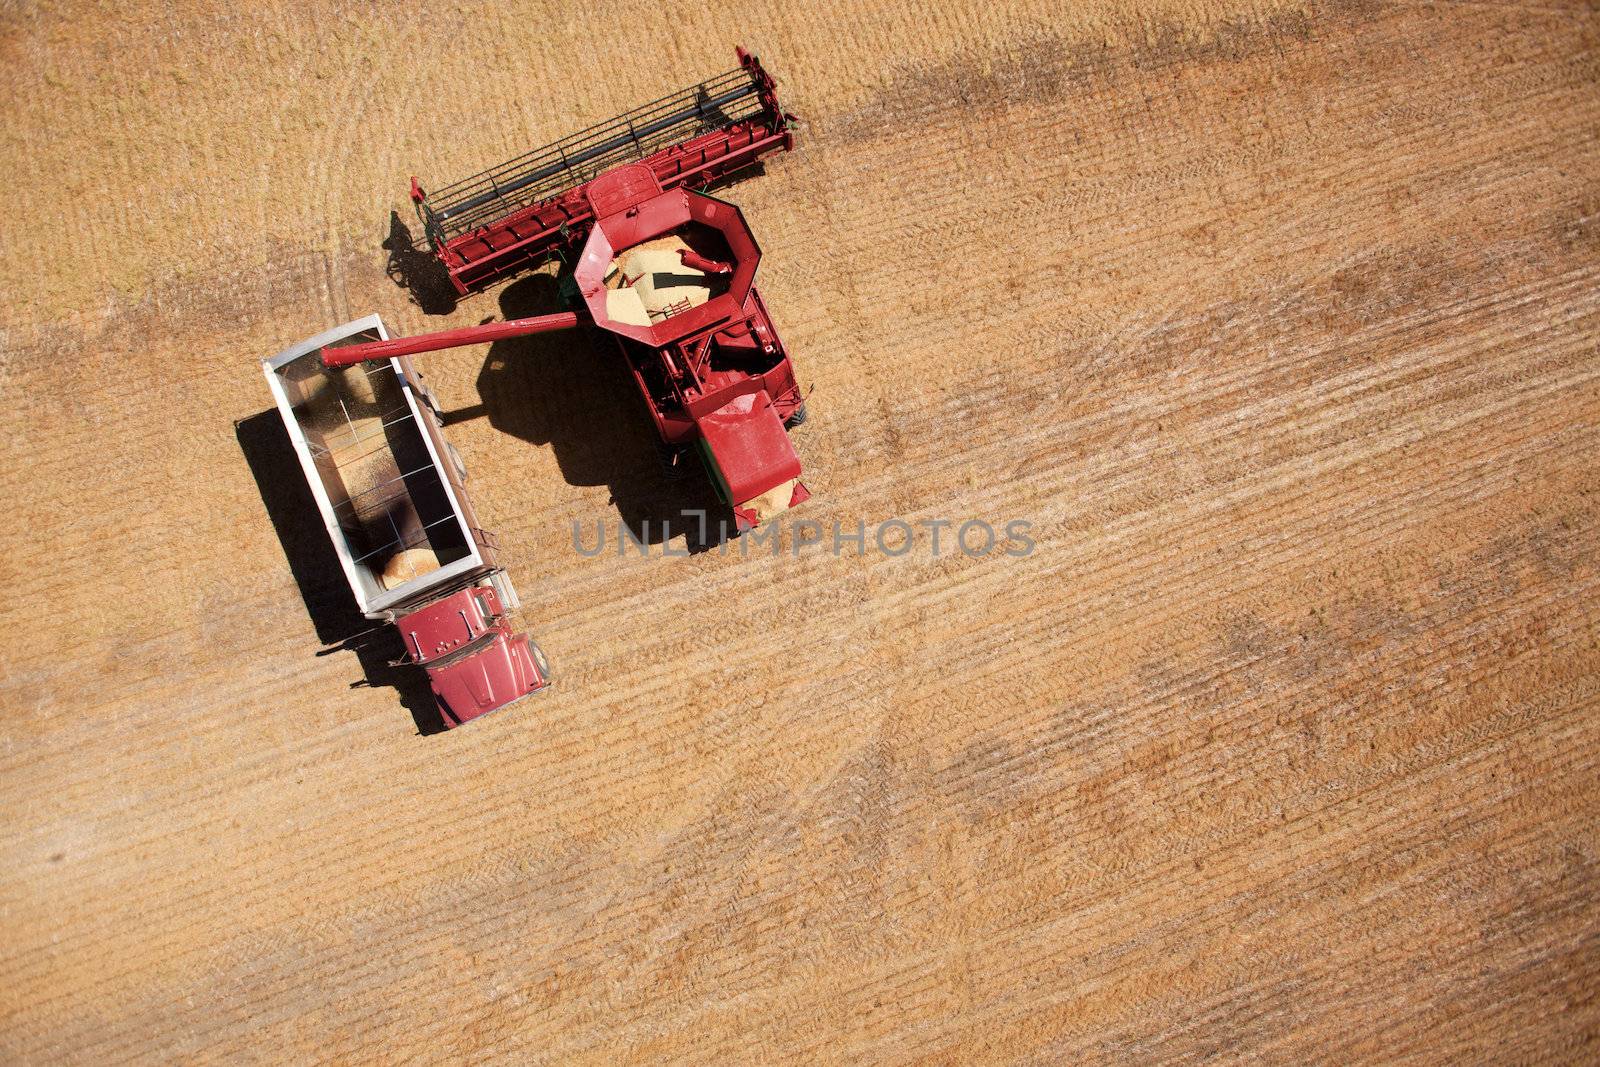 Grain Truck and Harvester by leaf